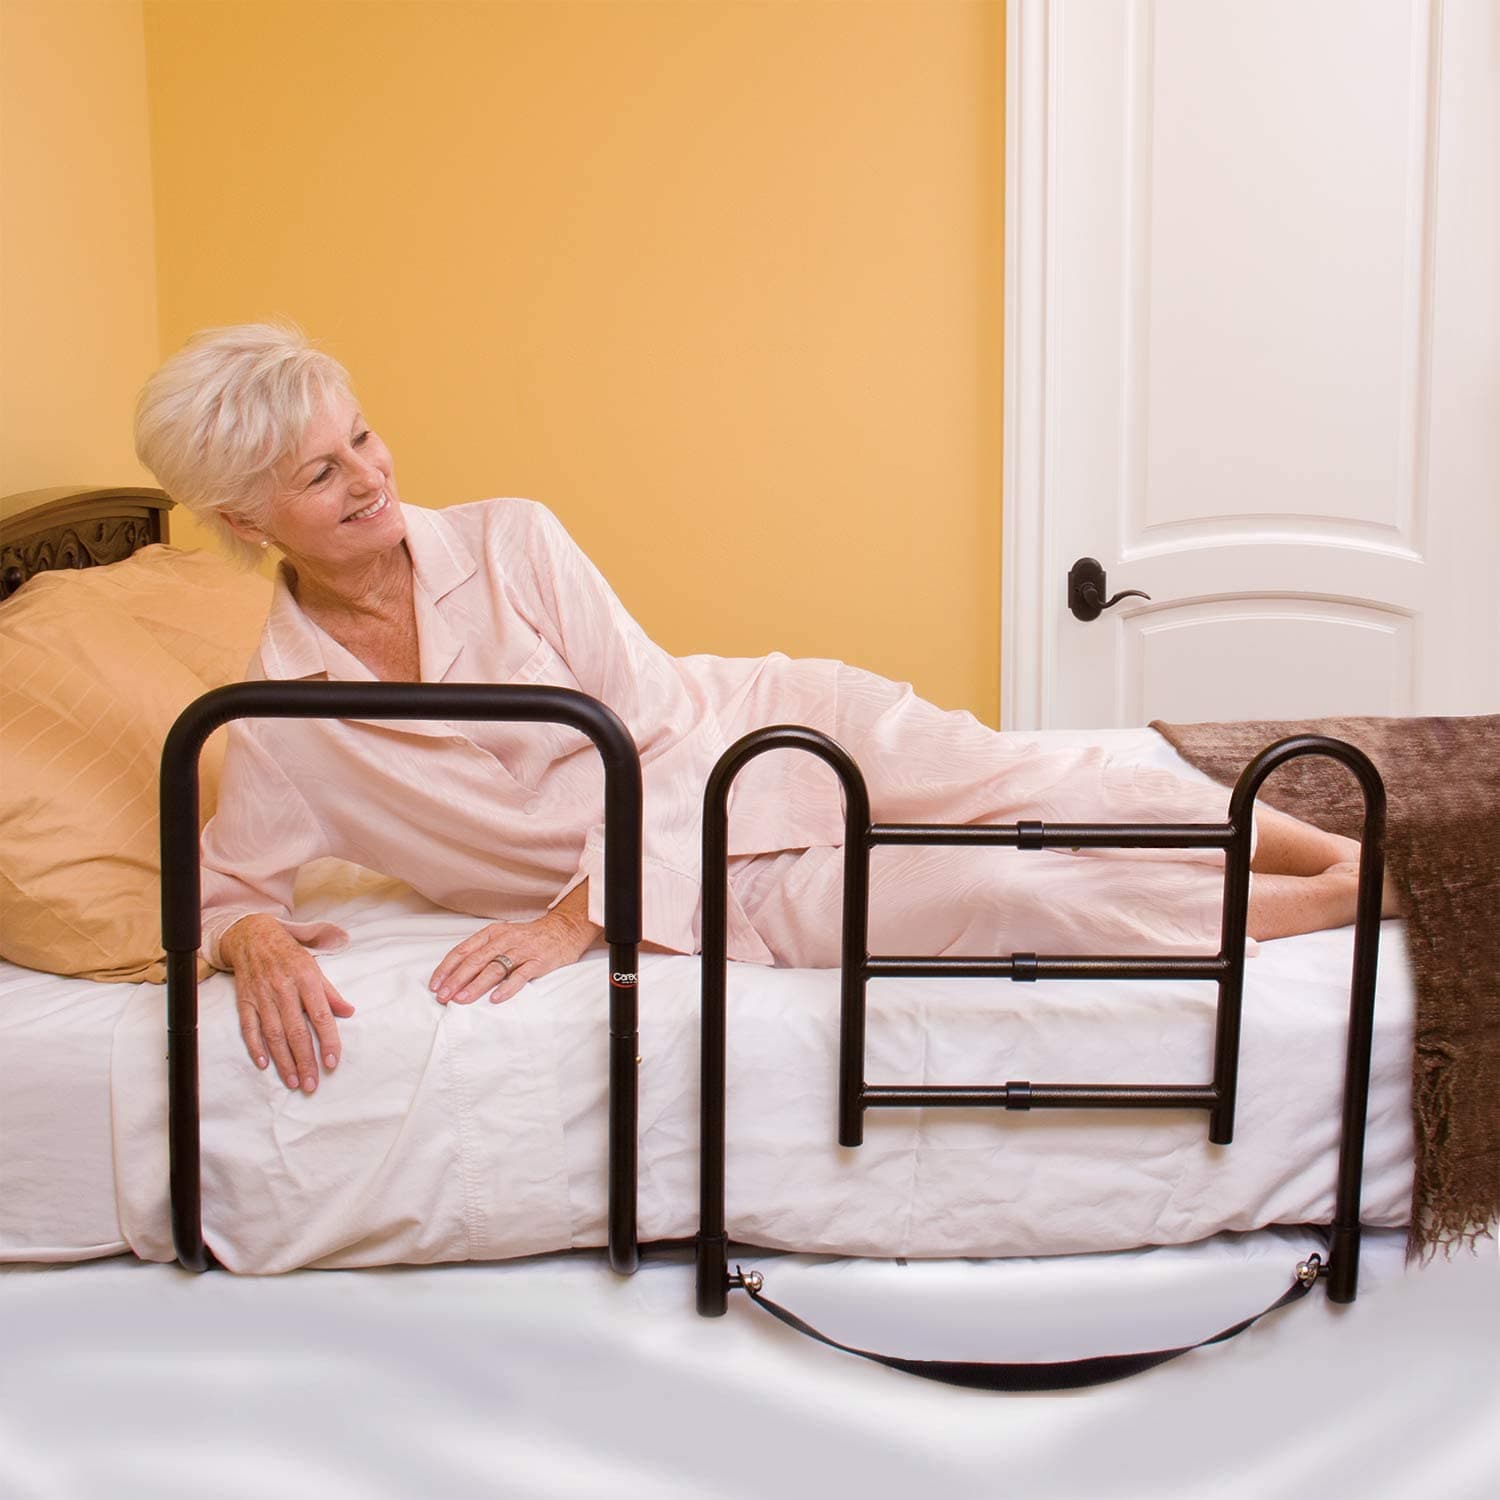 Carex Easy-Up Bed Safety Rails  - Combination Fall Prevention Safety Rails